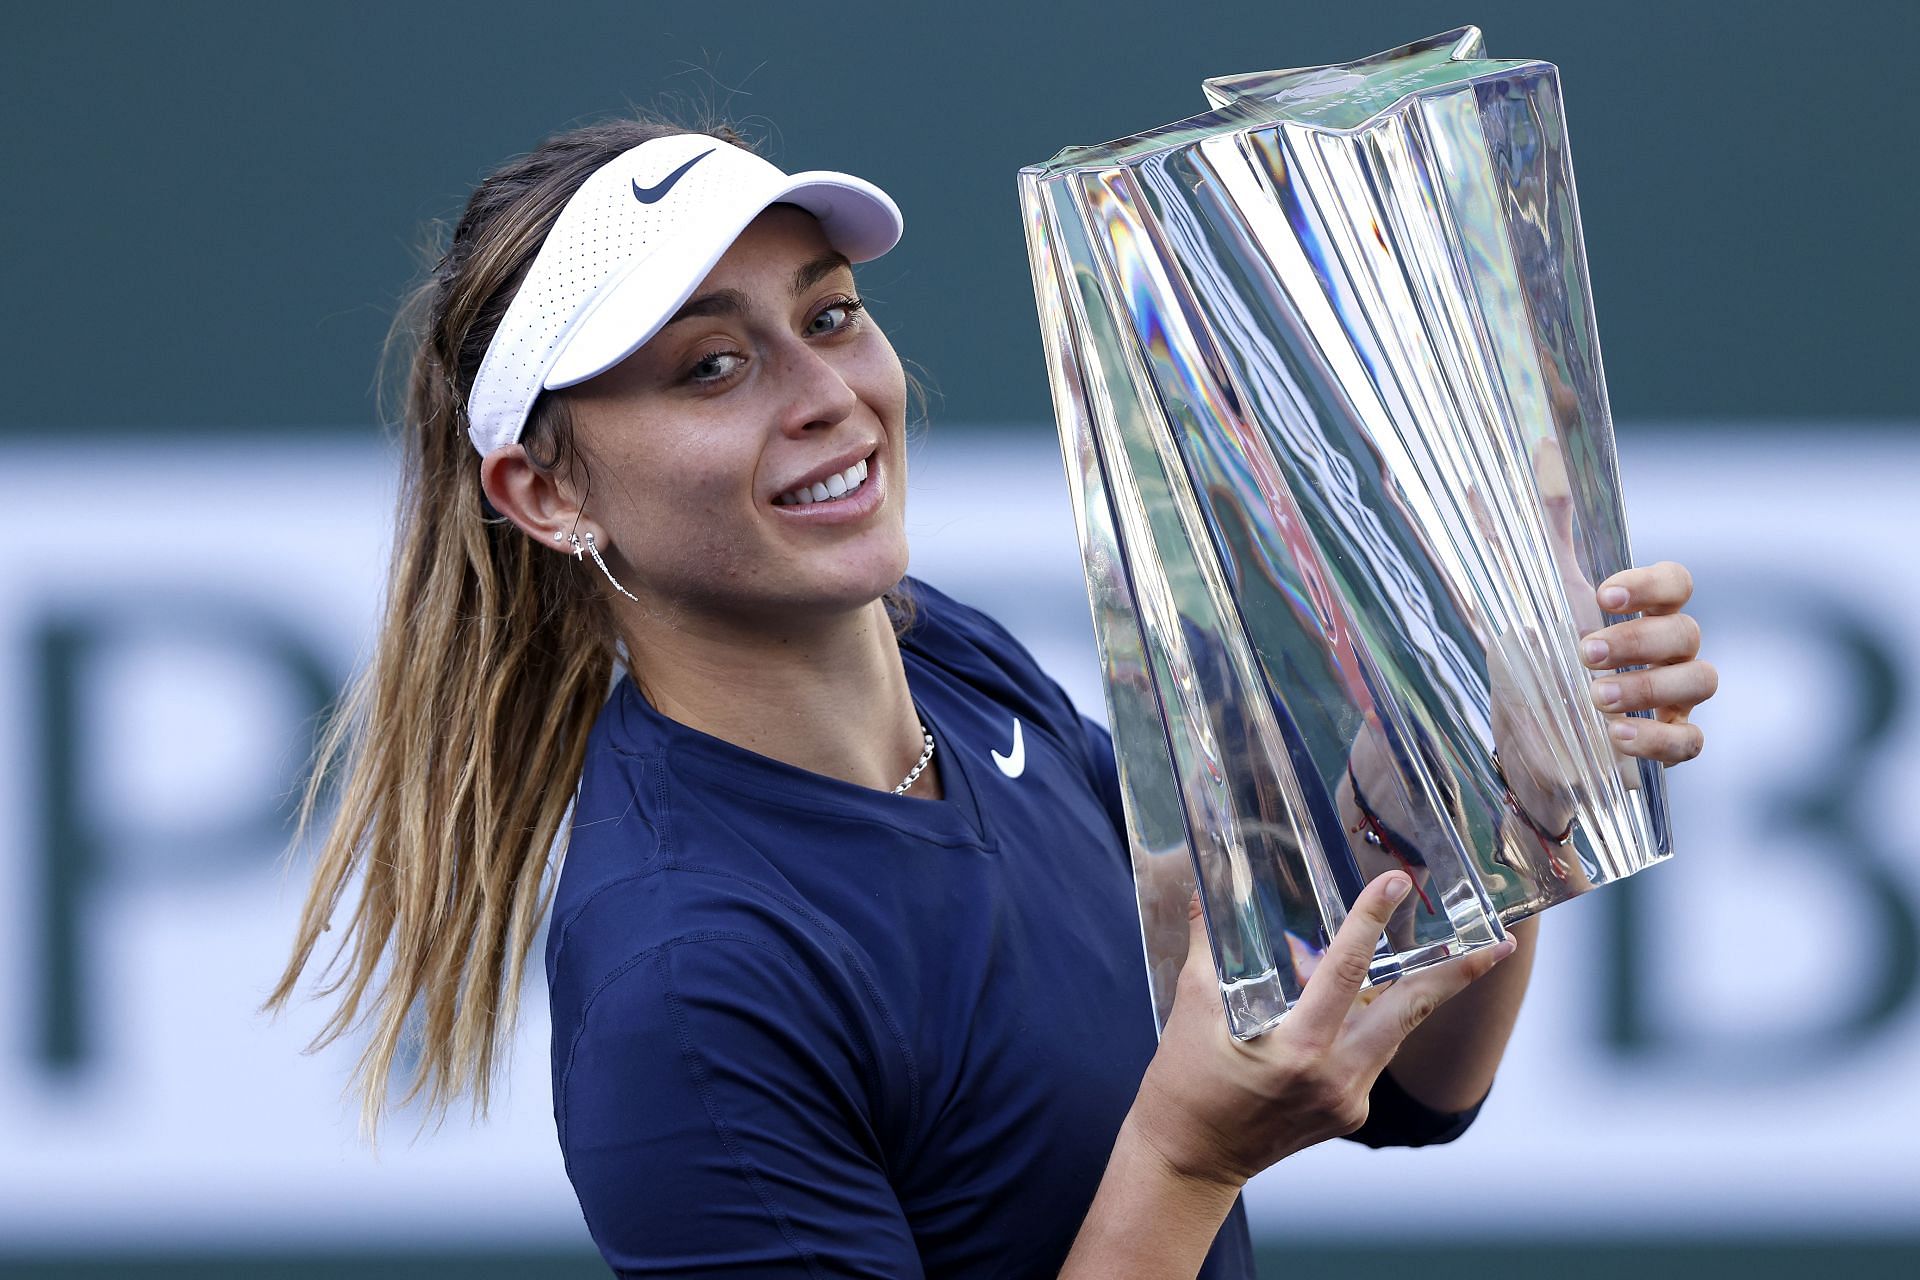 A title run in Miami might help Paula Badosa become the World No. 1 over Ashleigh Barty